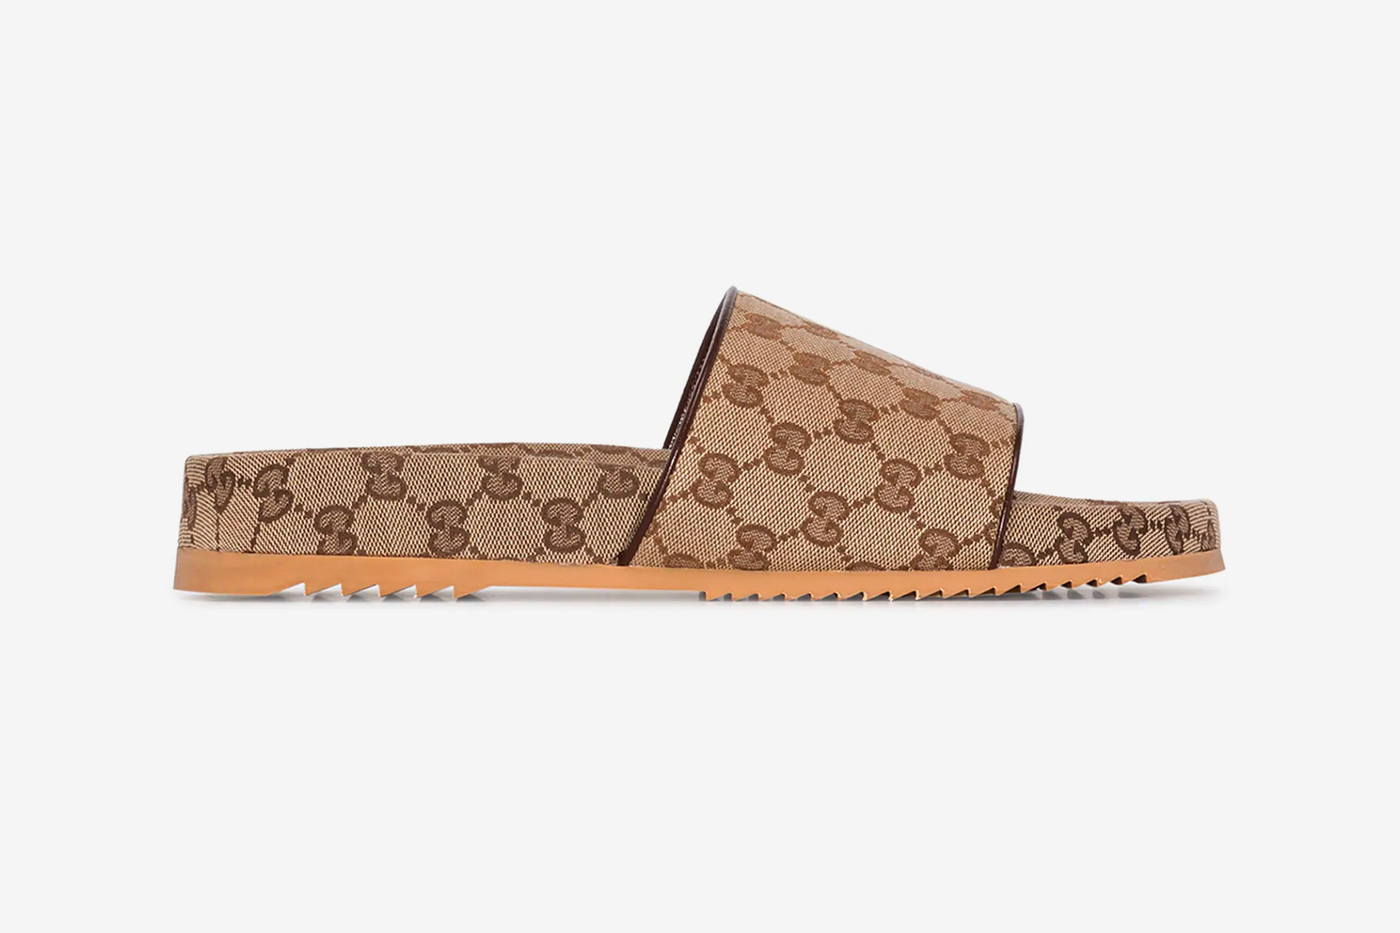 Gucci GG Supreme Sandals in Brown | Hypebeast